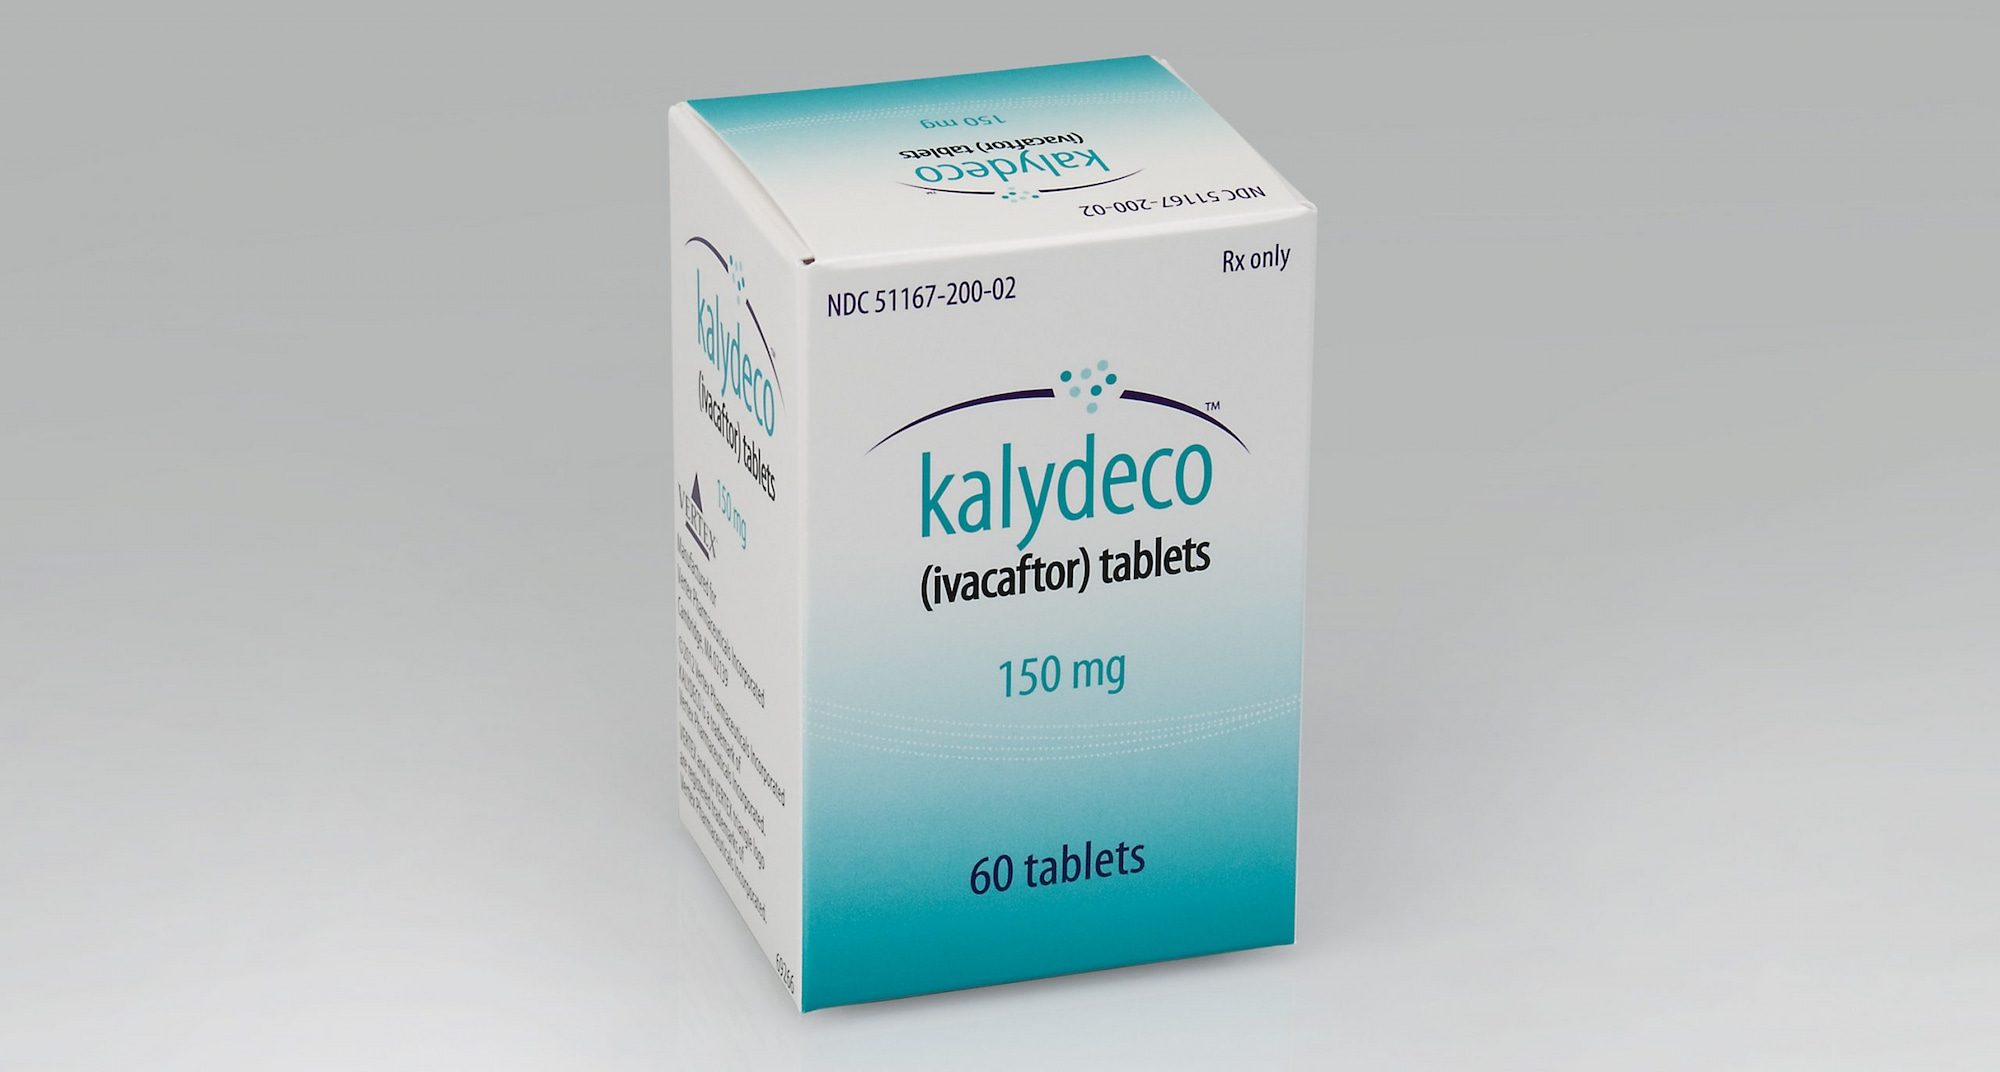 Kalydeco (ivacaftor).